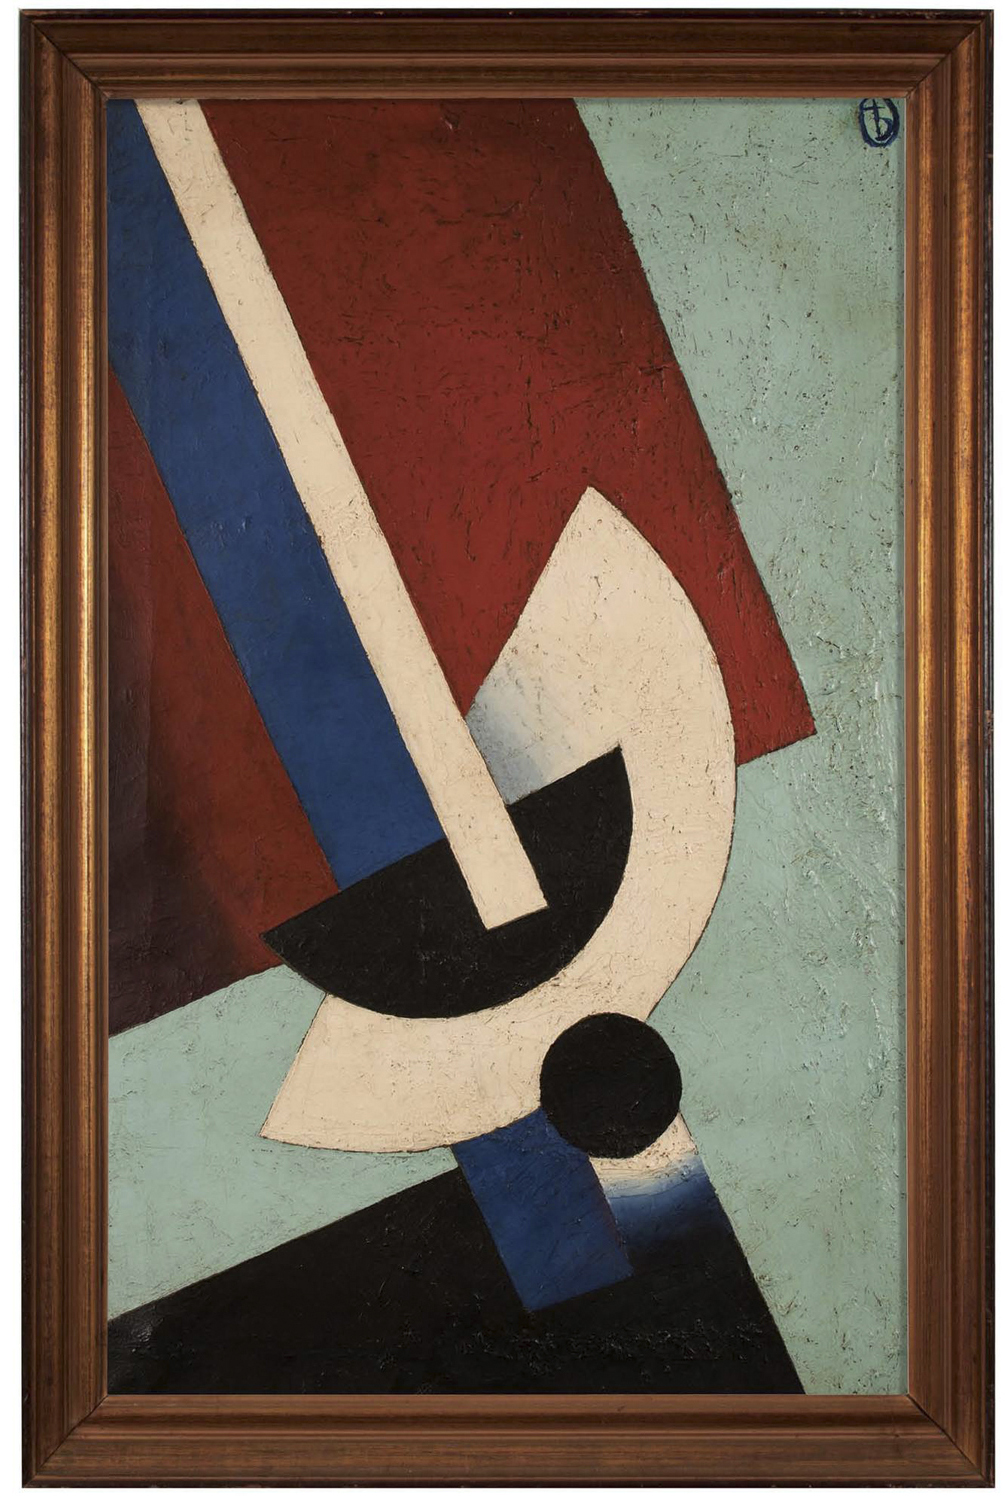  Unattributed. In the style of Alexander Rodchenko Signed " b” (archaic Cyrillic “yat” symbol), &nbsp;upper right front.&nbsp; Oil on canvas. 50 x 83 cm. 